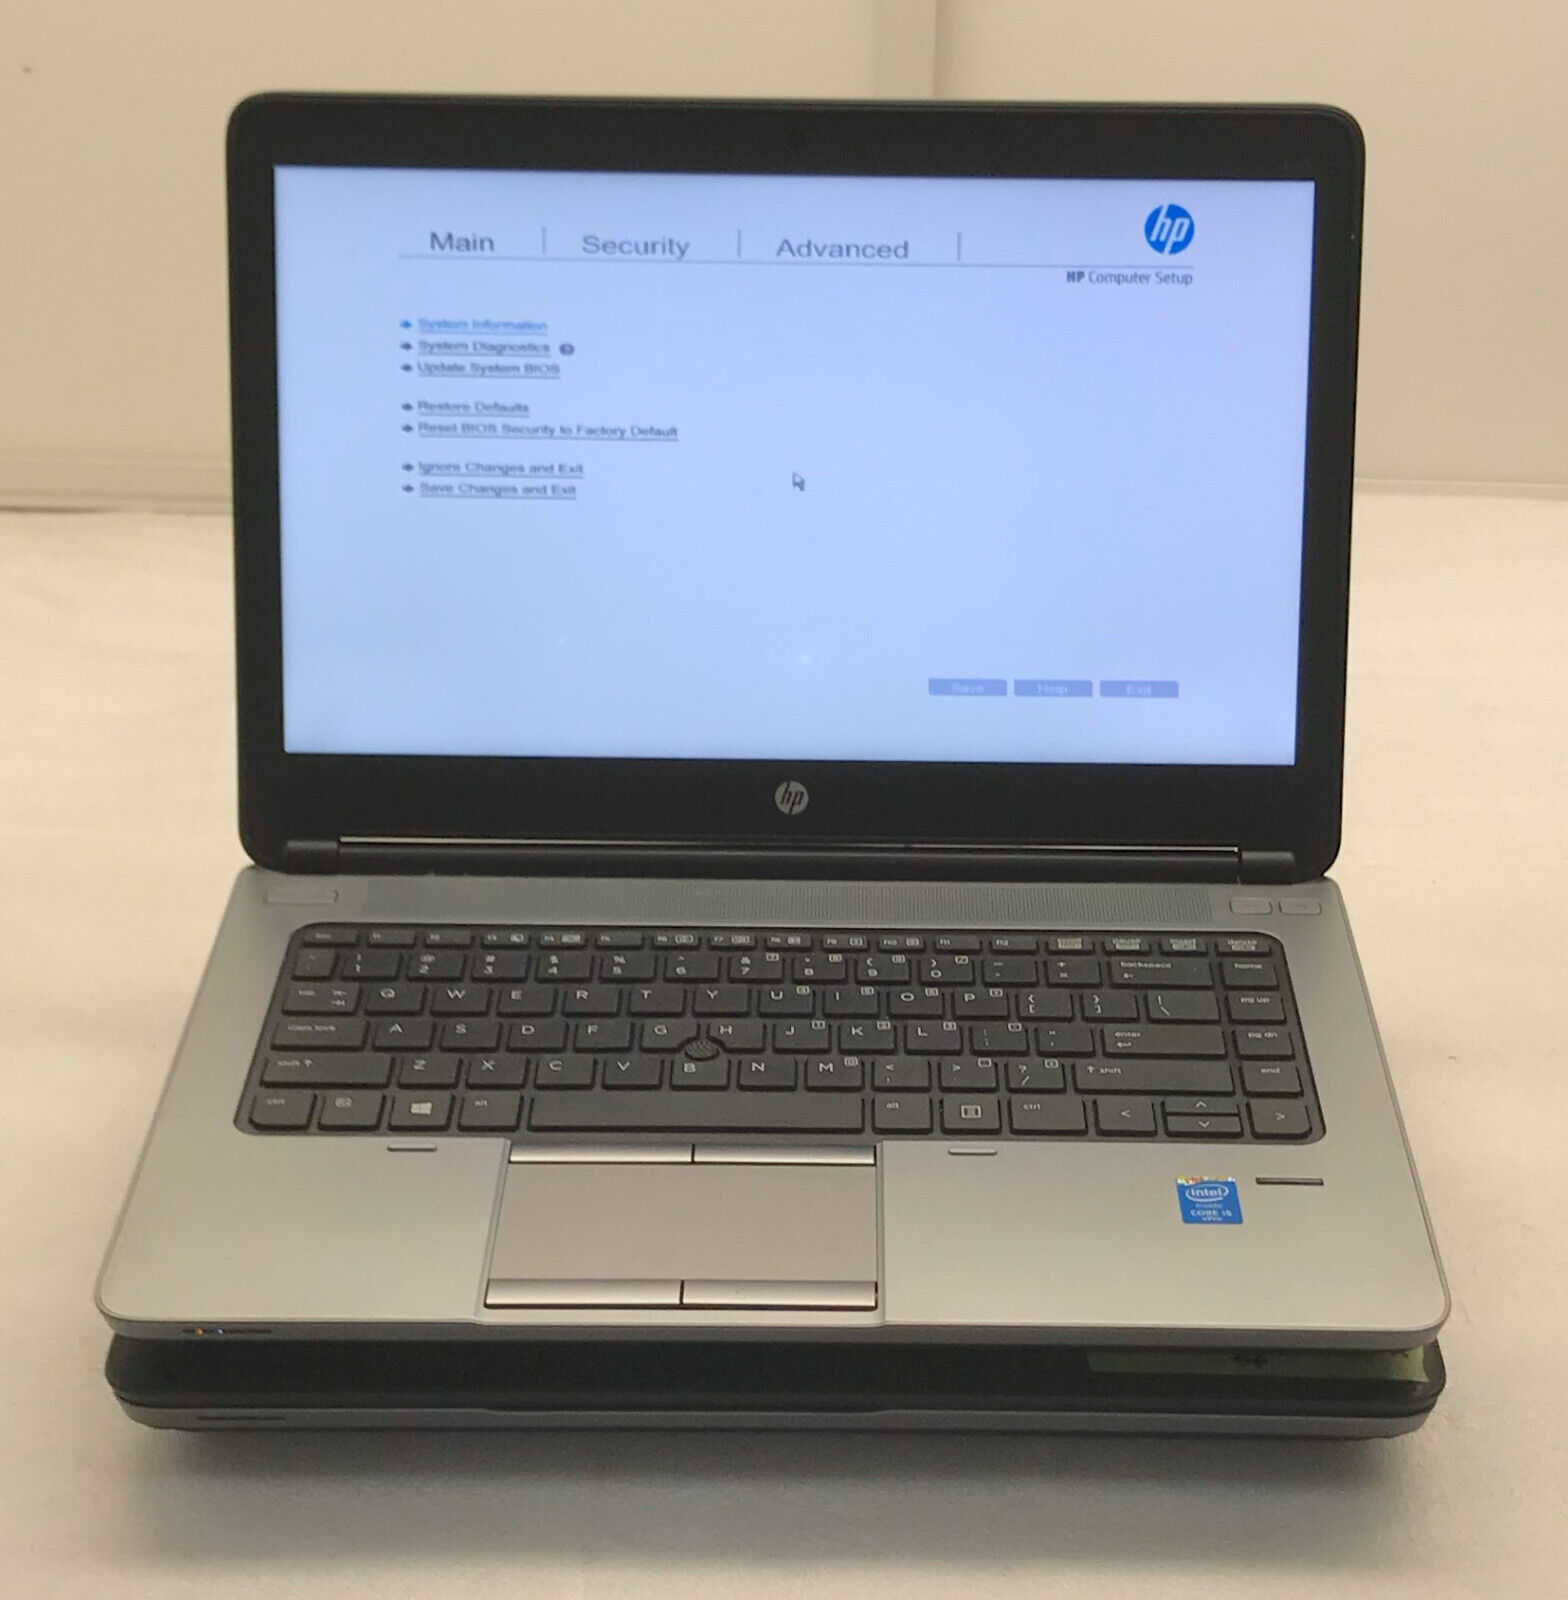 (Lot of 2) HP ProBook 640 G1 i5-4300M 2.60GHz 8GB DDR3  No OS/HDD